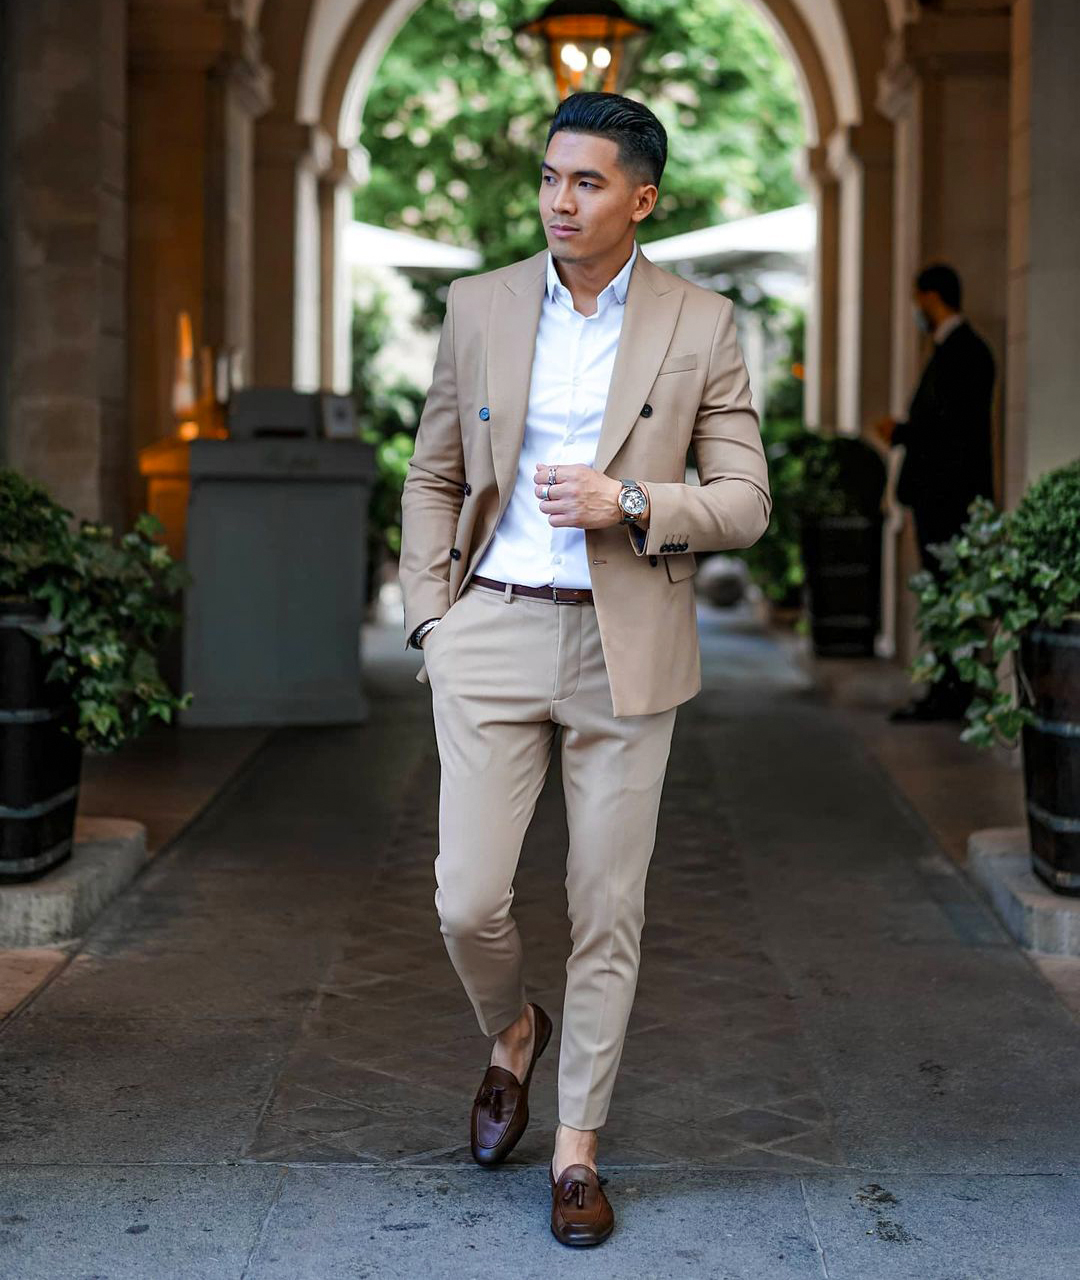 How to wear a tan suit with a white dress shirt